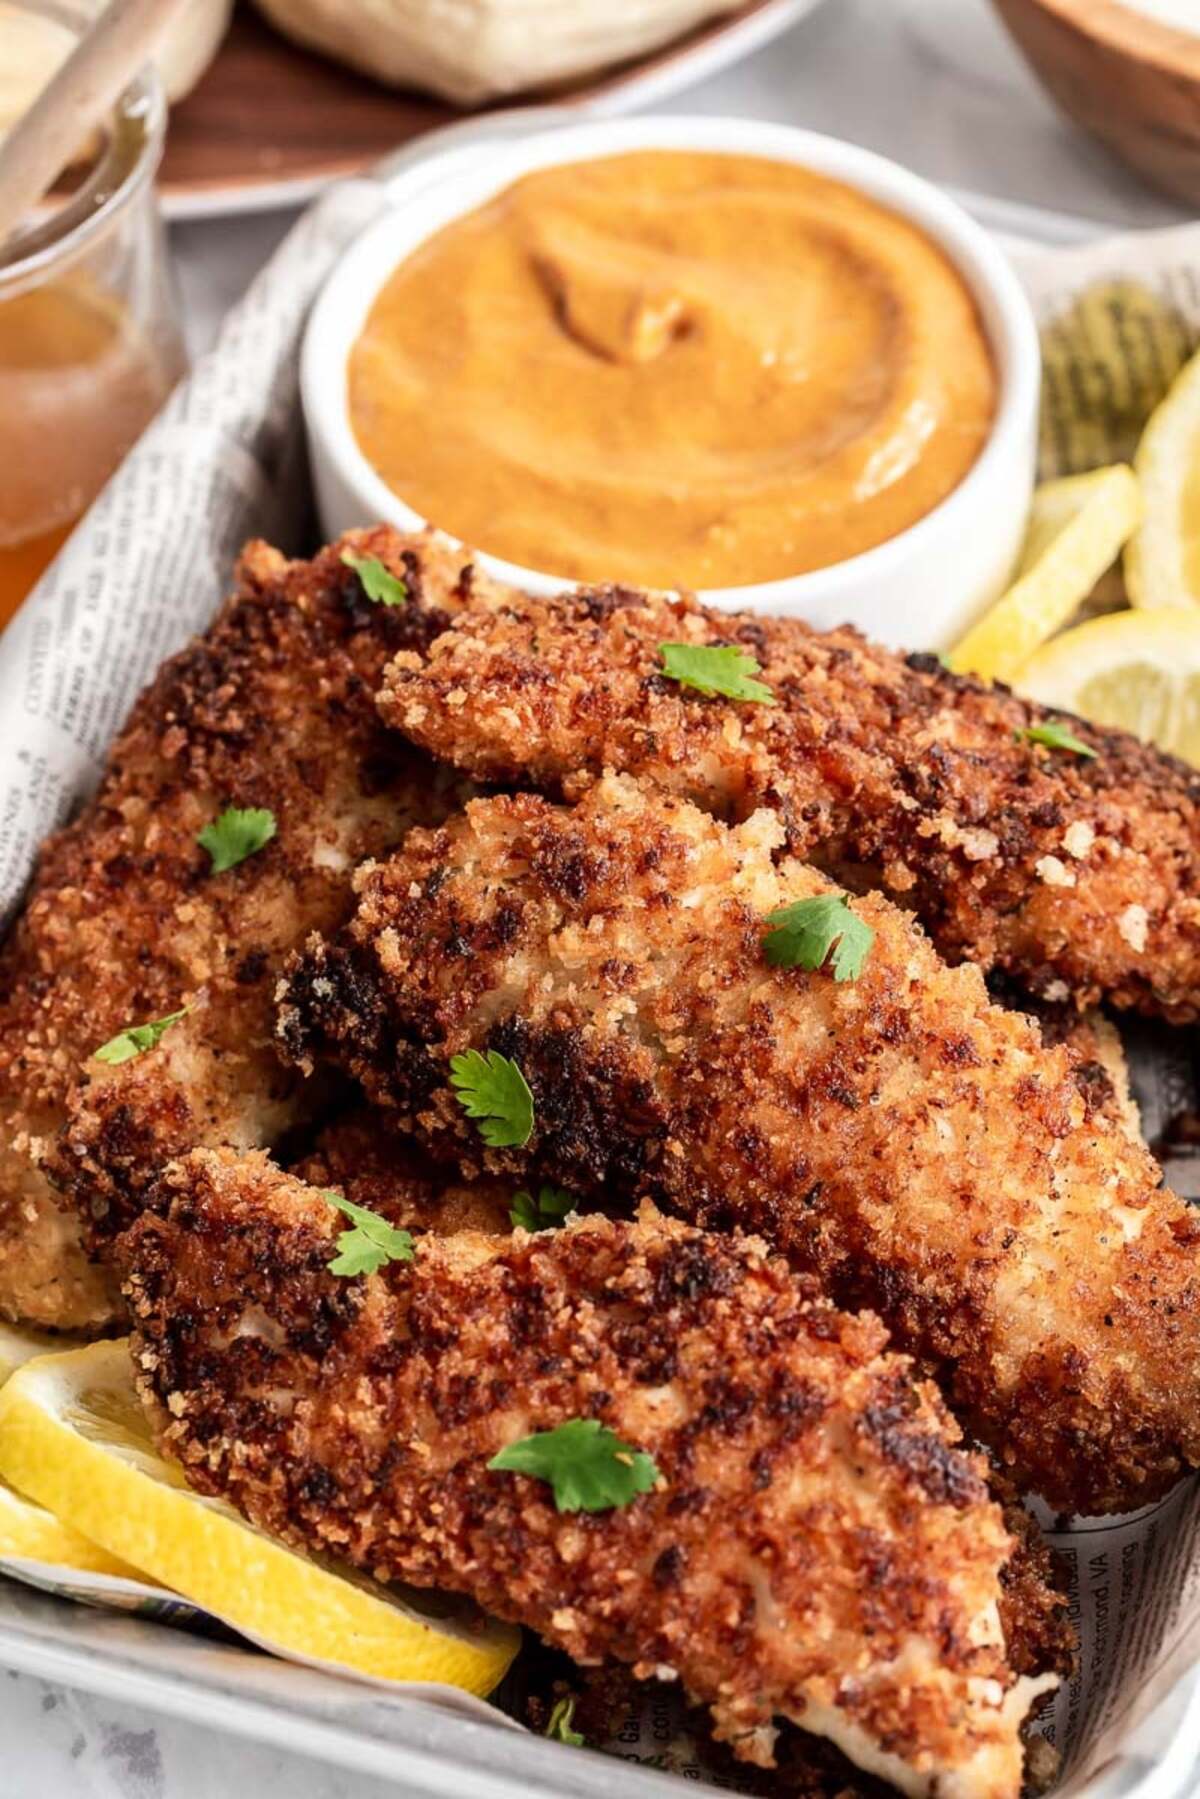 A tray of fried chicken fingers with dipping sauce and lemon wedges.